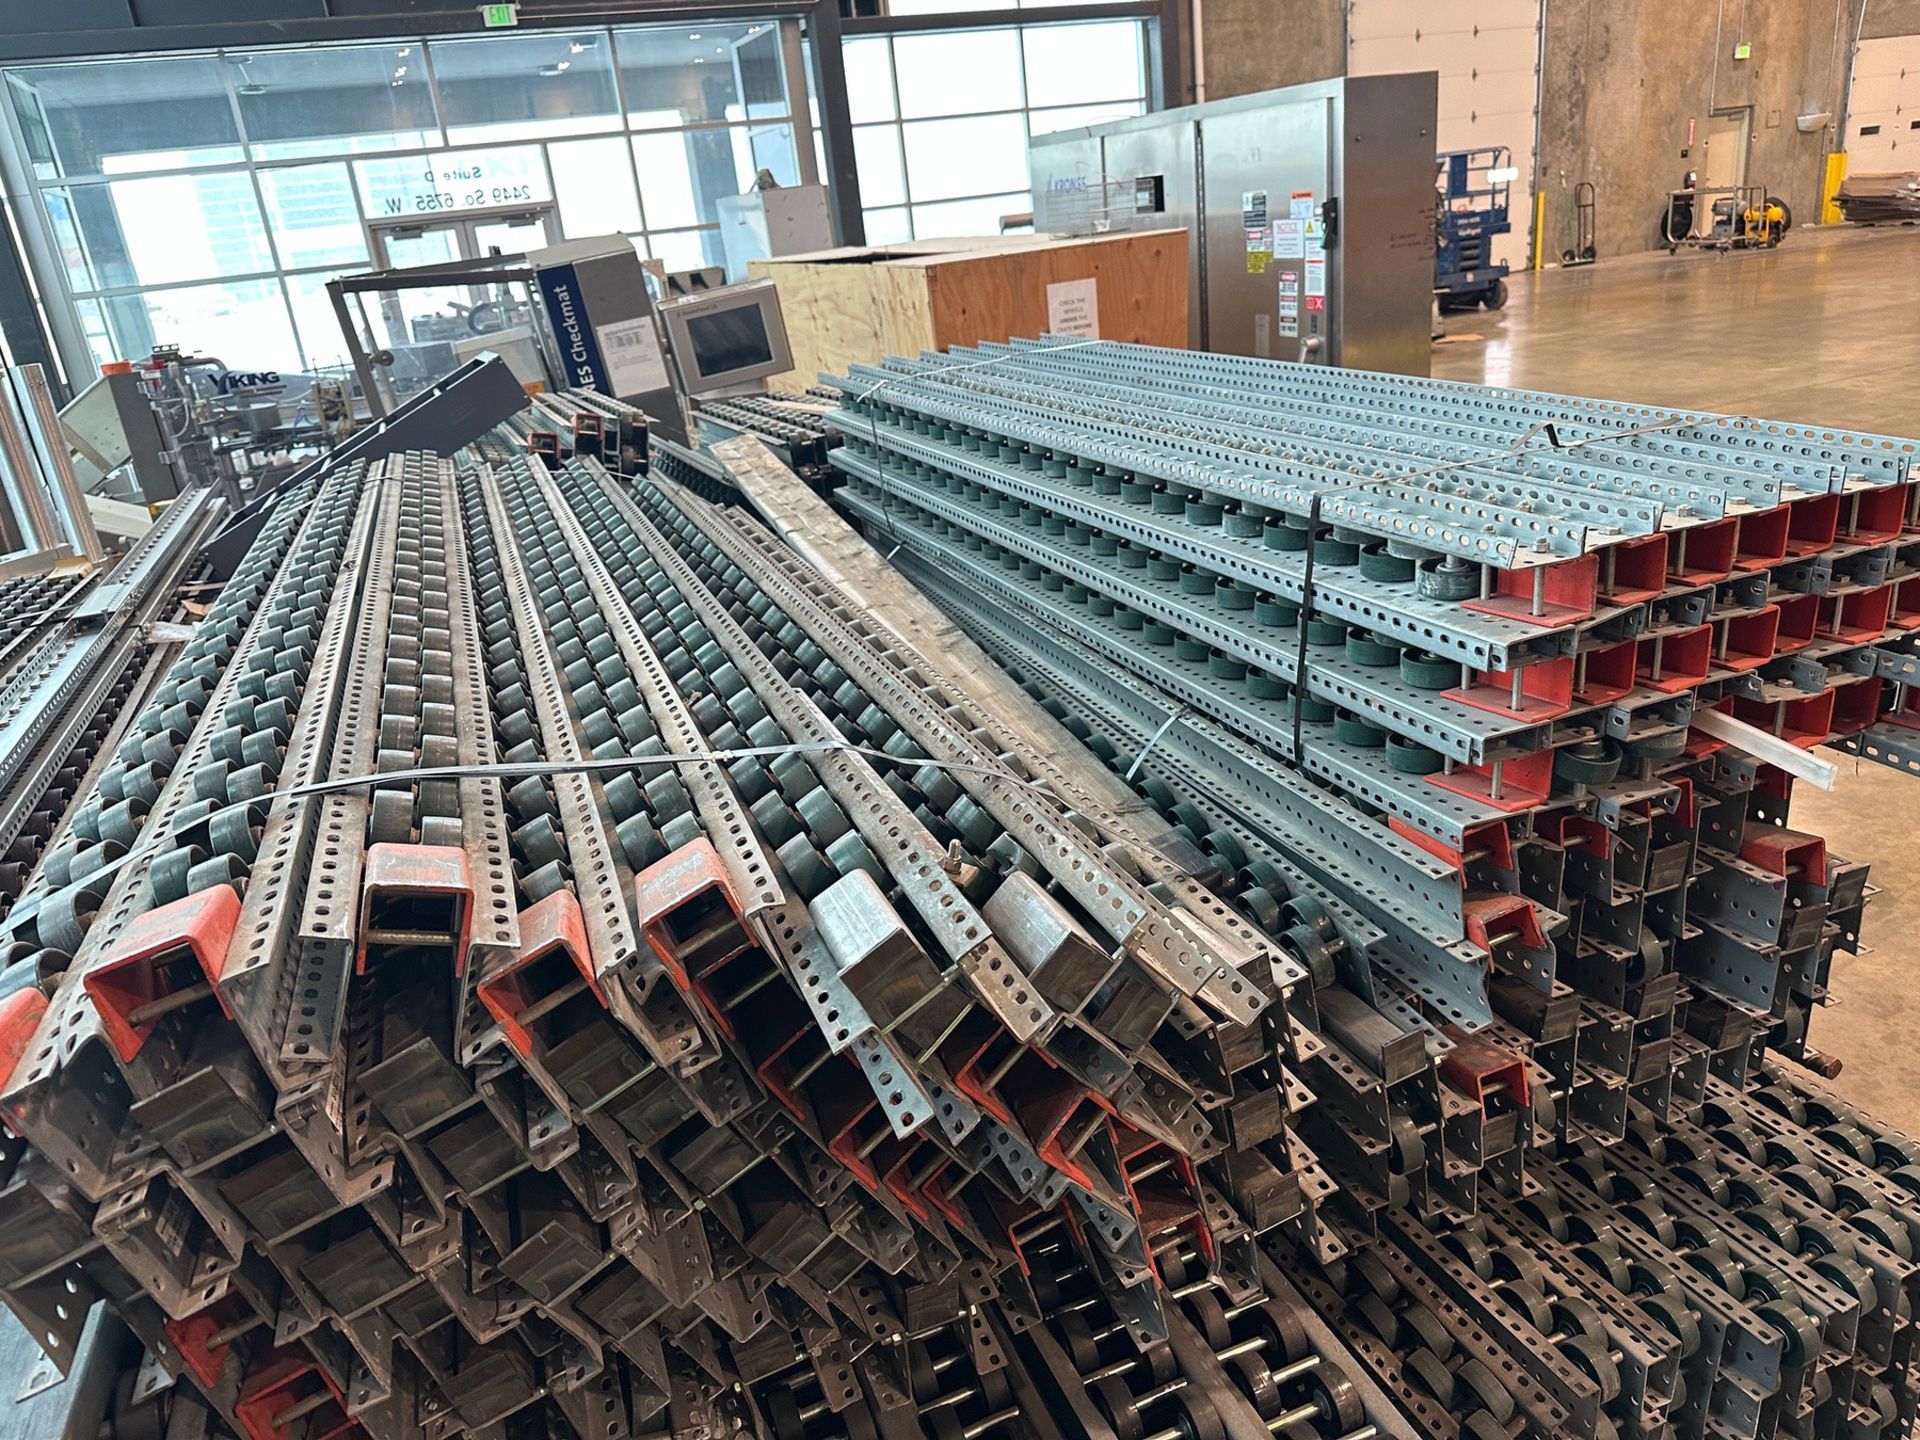 Lot of Interroll Pallet Racking Rollers - Approx. (150) Total Pieces at 5" x 100" | Rig Fee $350 - Image 4 of 5